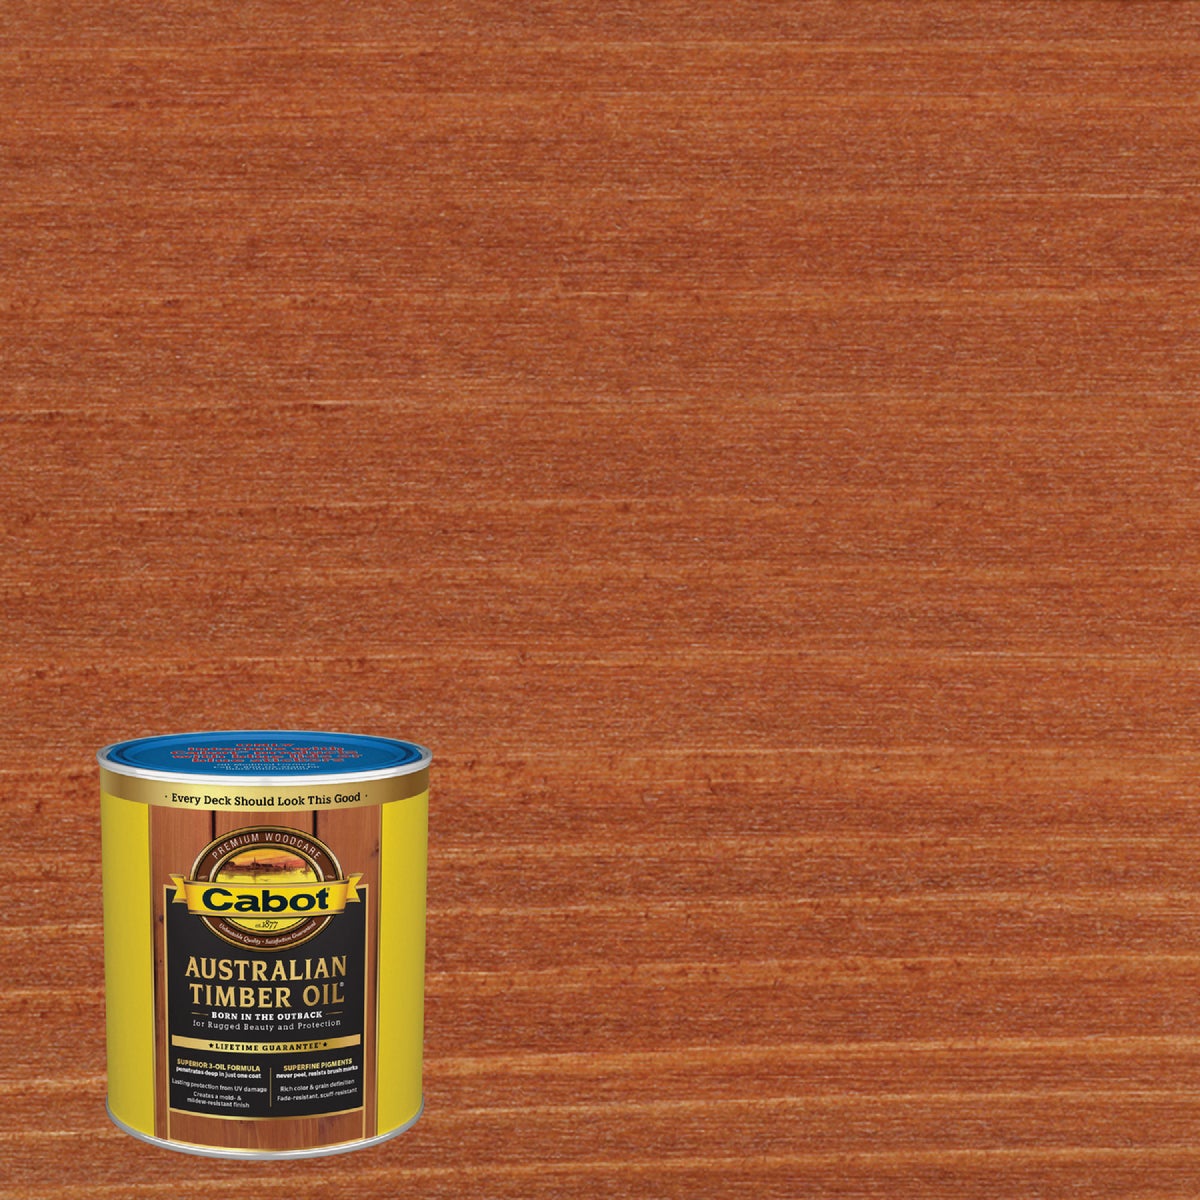 Cabot Australian Timber Oil Water Reducible Translucent Exterior Oil Finish, Mahogany Flame, 1 Qt.